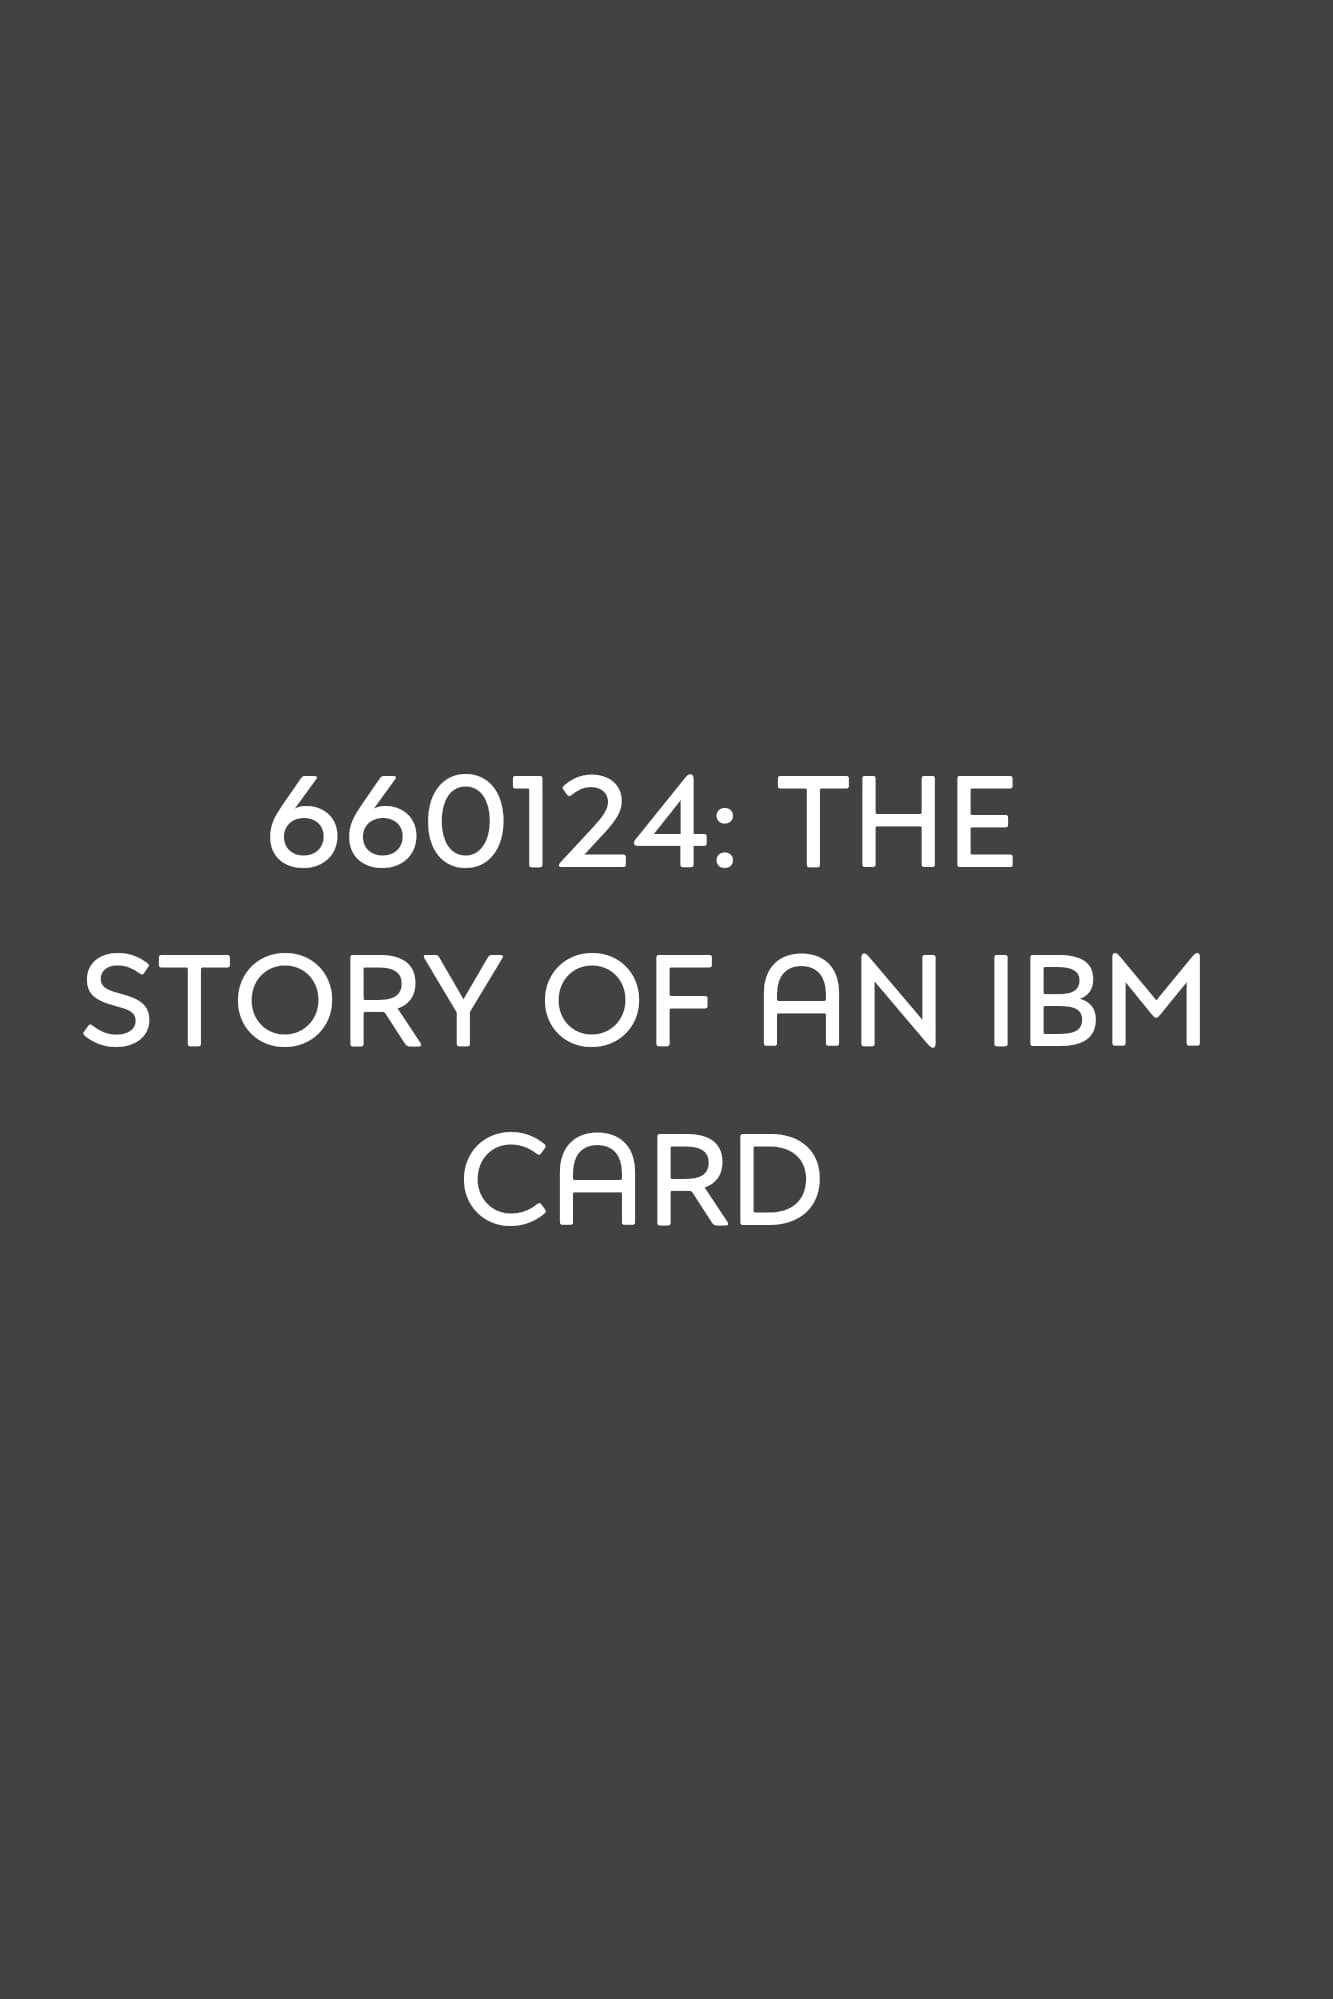 660124: The Story of an IBM Card